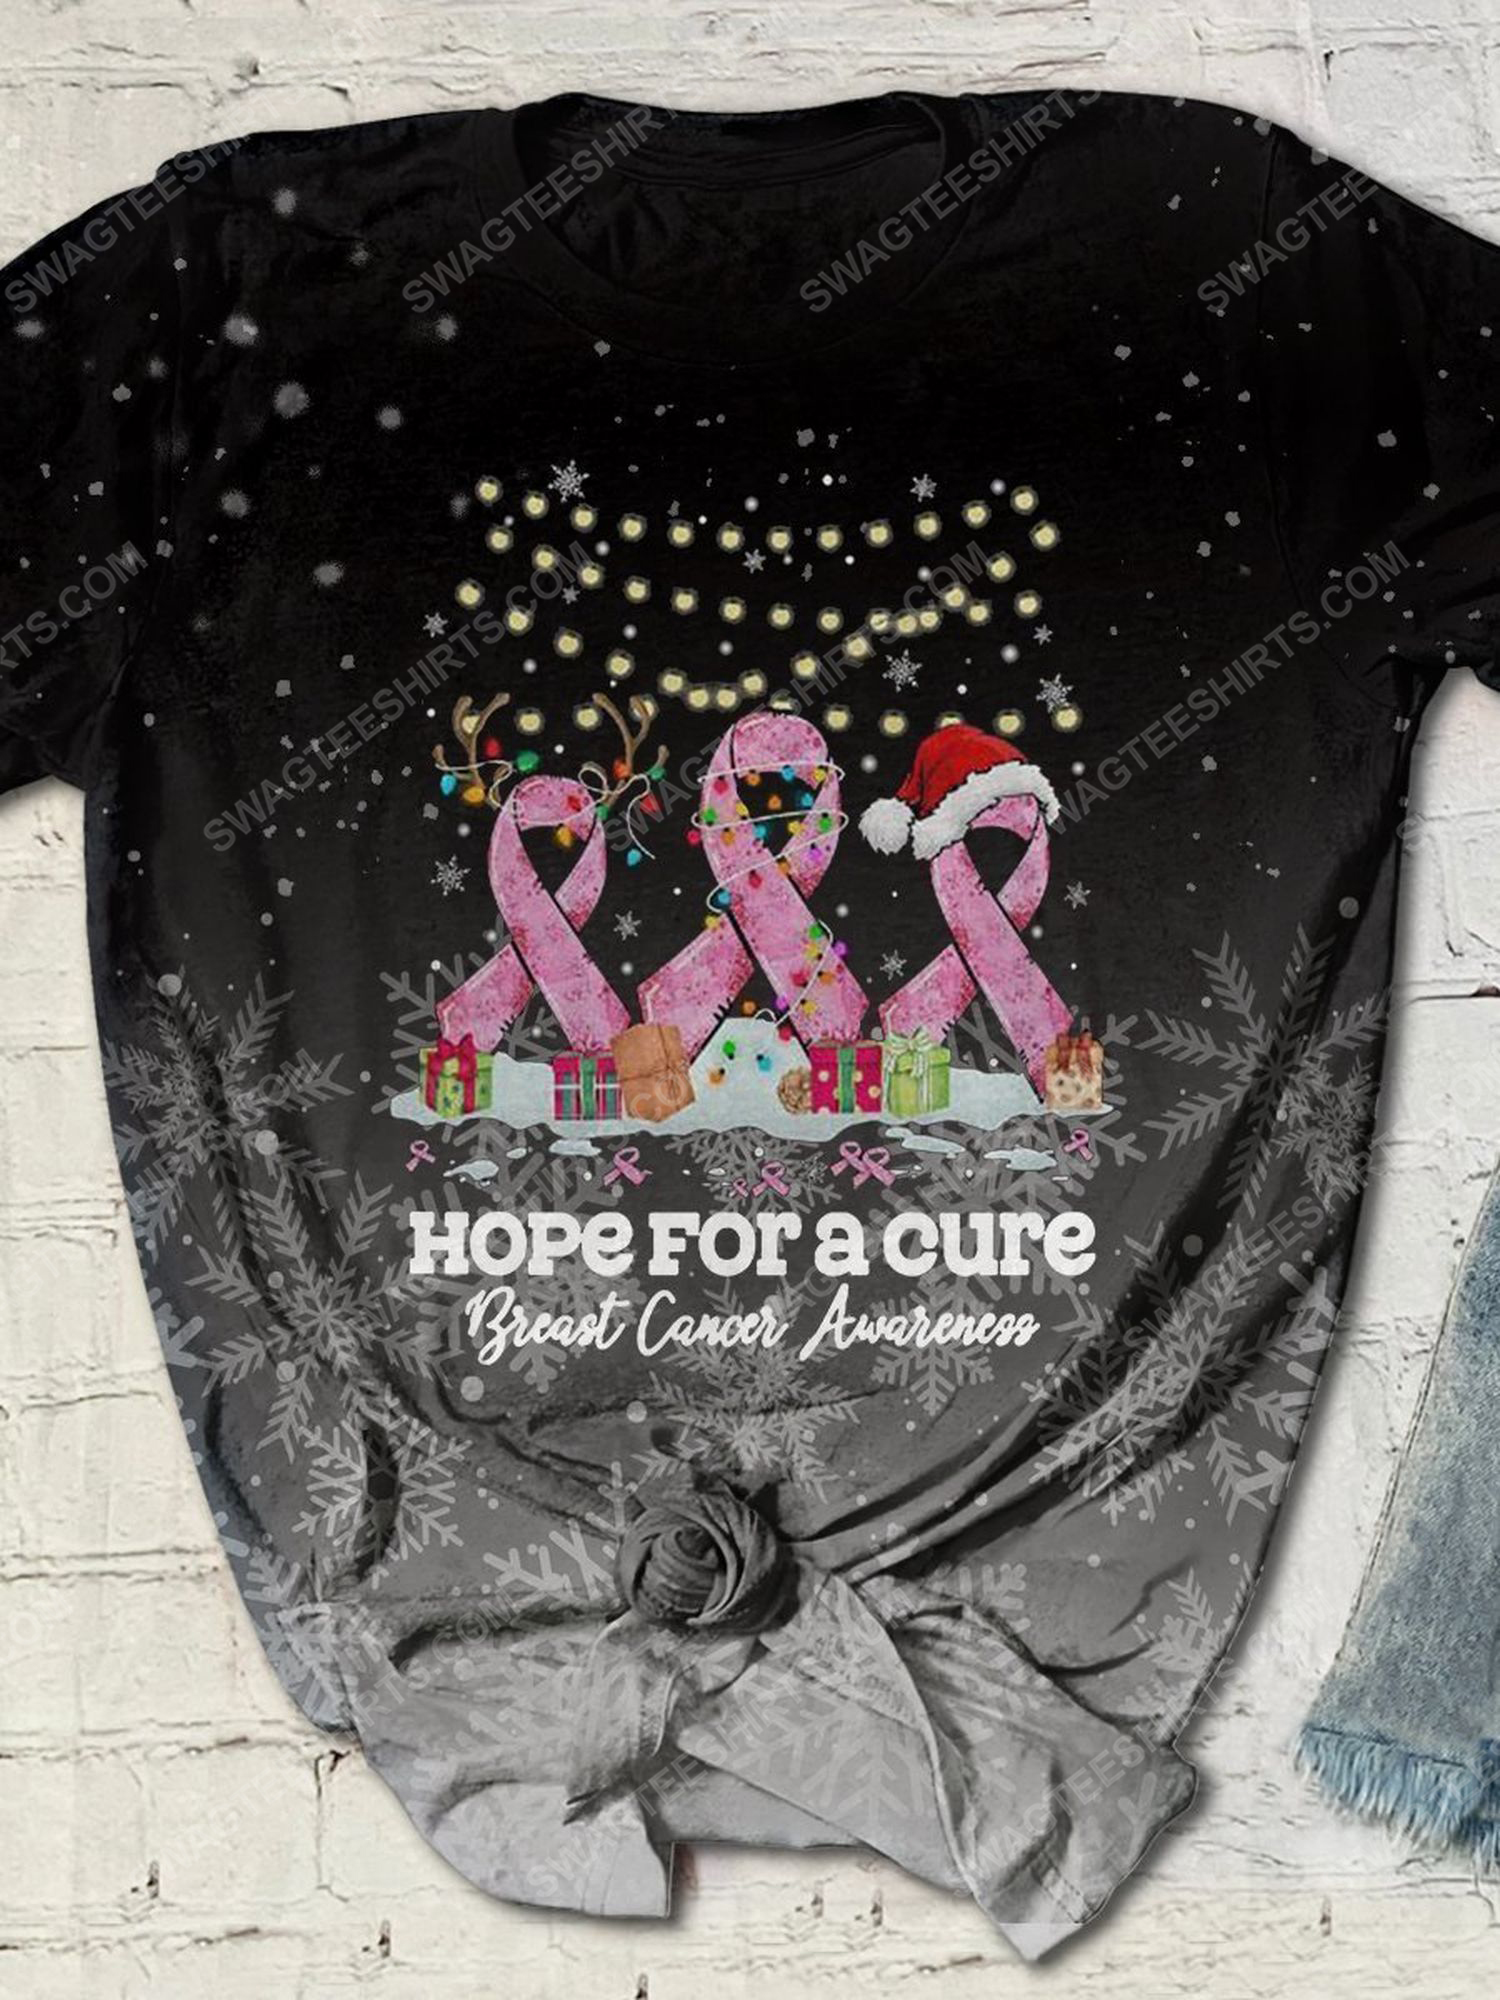 Breast cancer awareness hope for a cure full print shirt 1 - Copy (3)